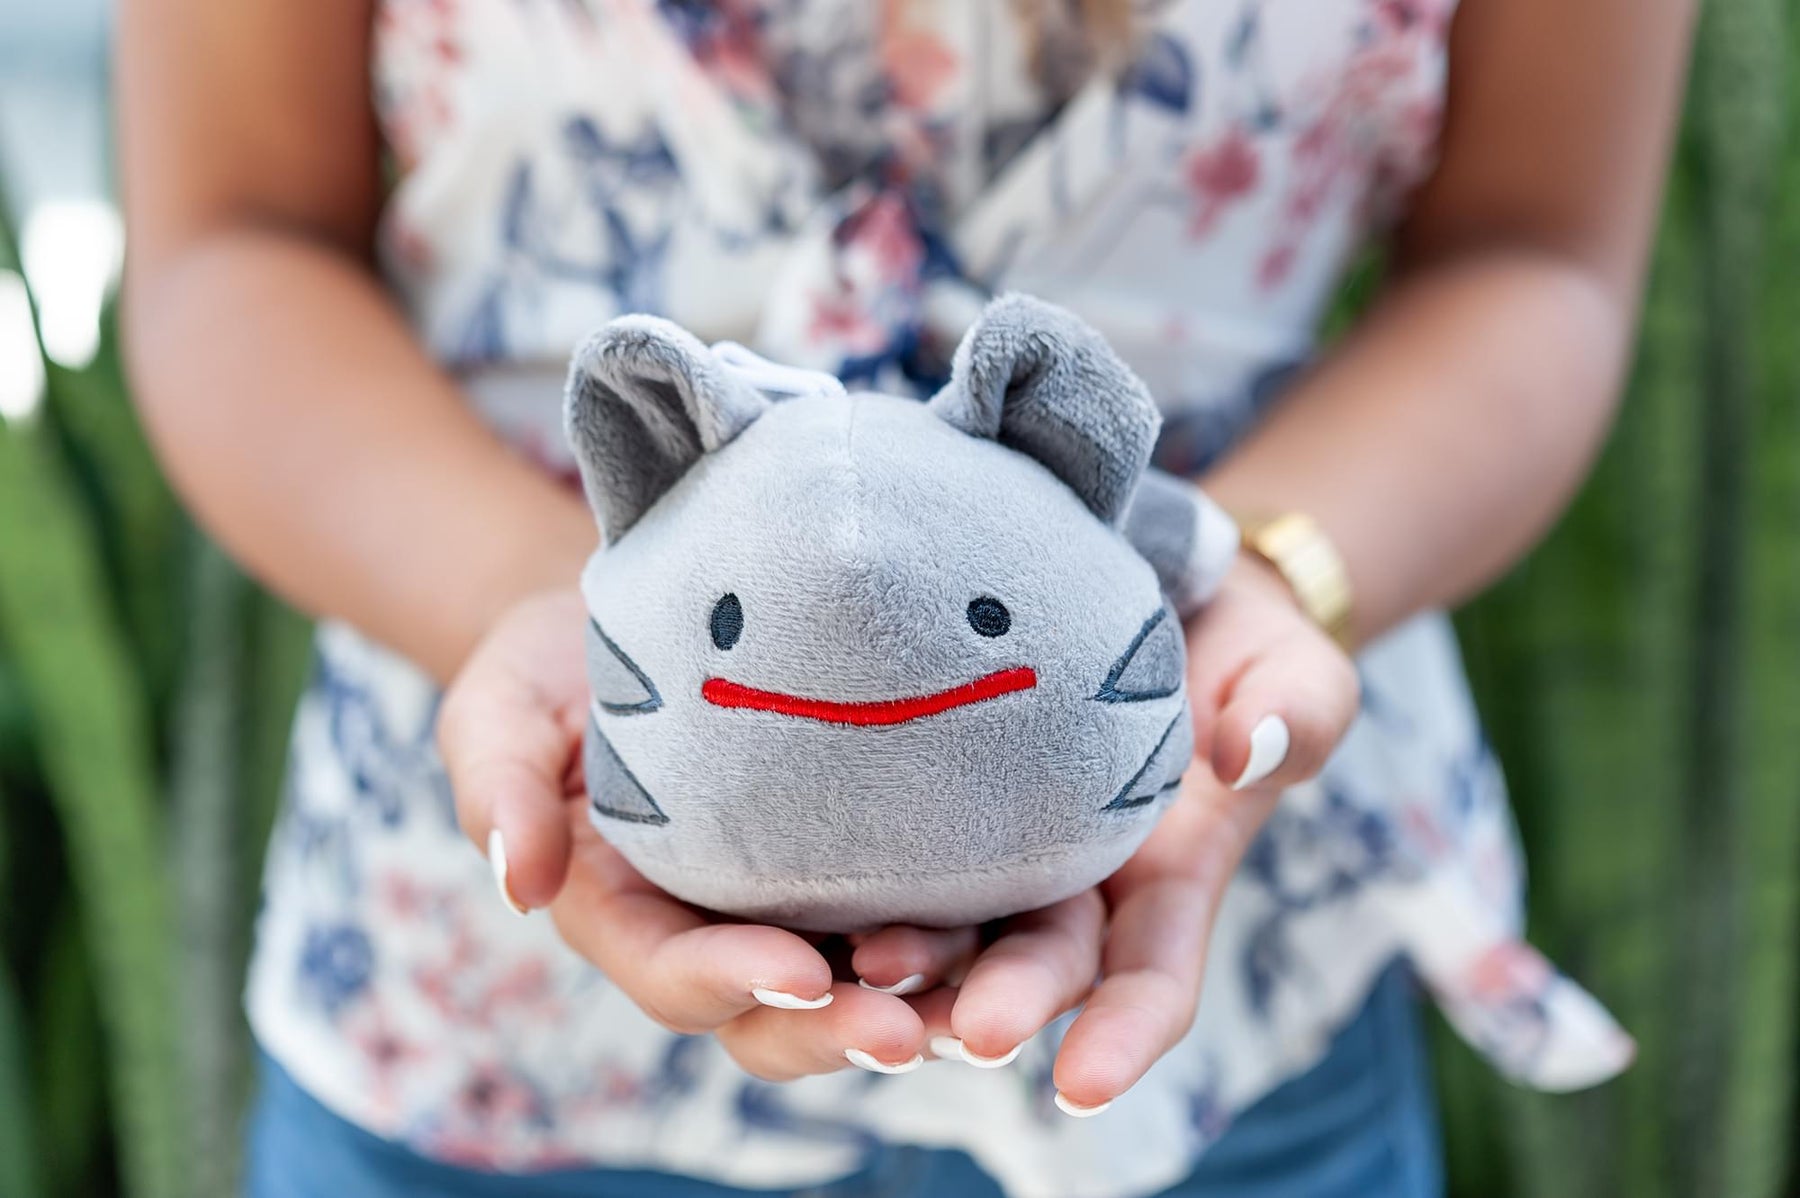 Good Smile Company Slime Rancher 4-inch Collector Plush Toy